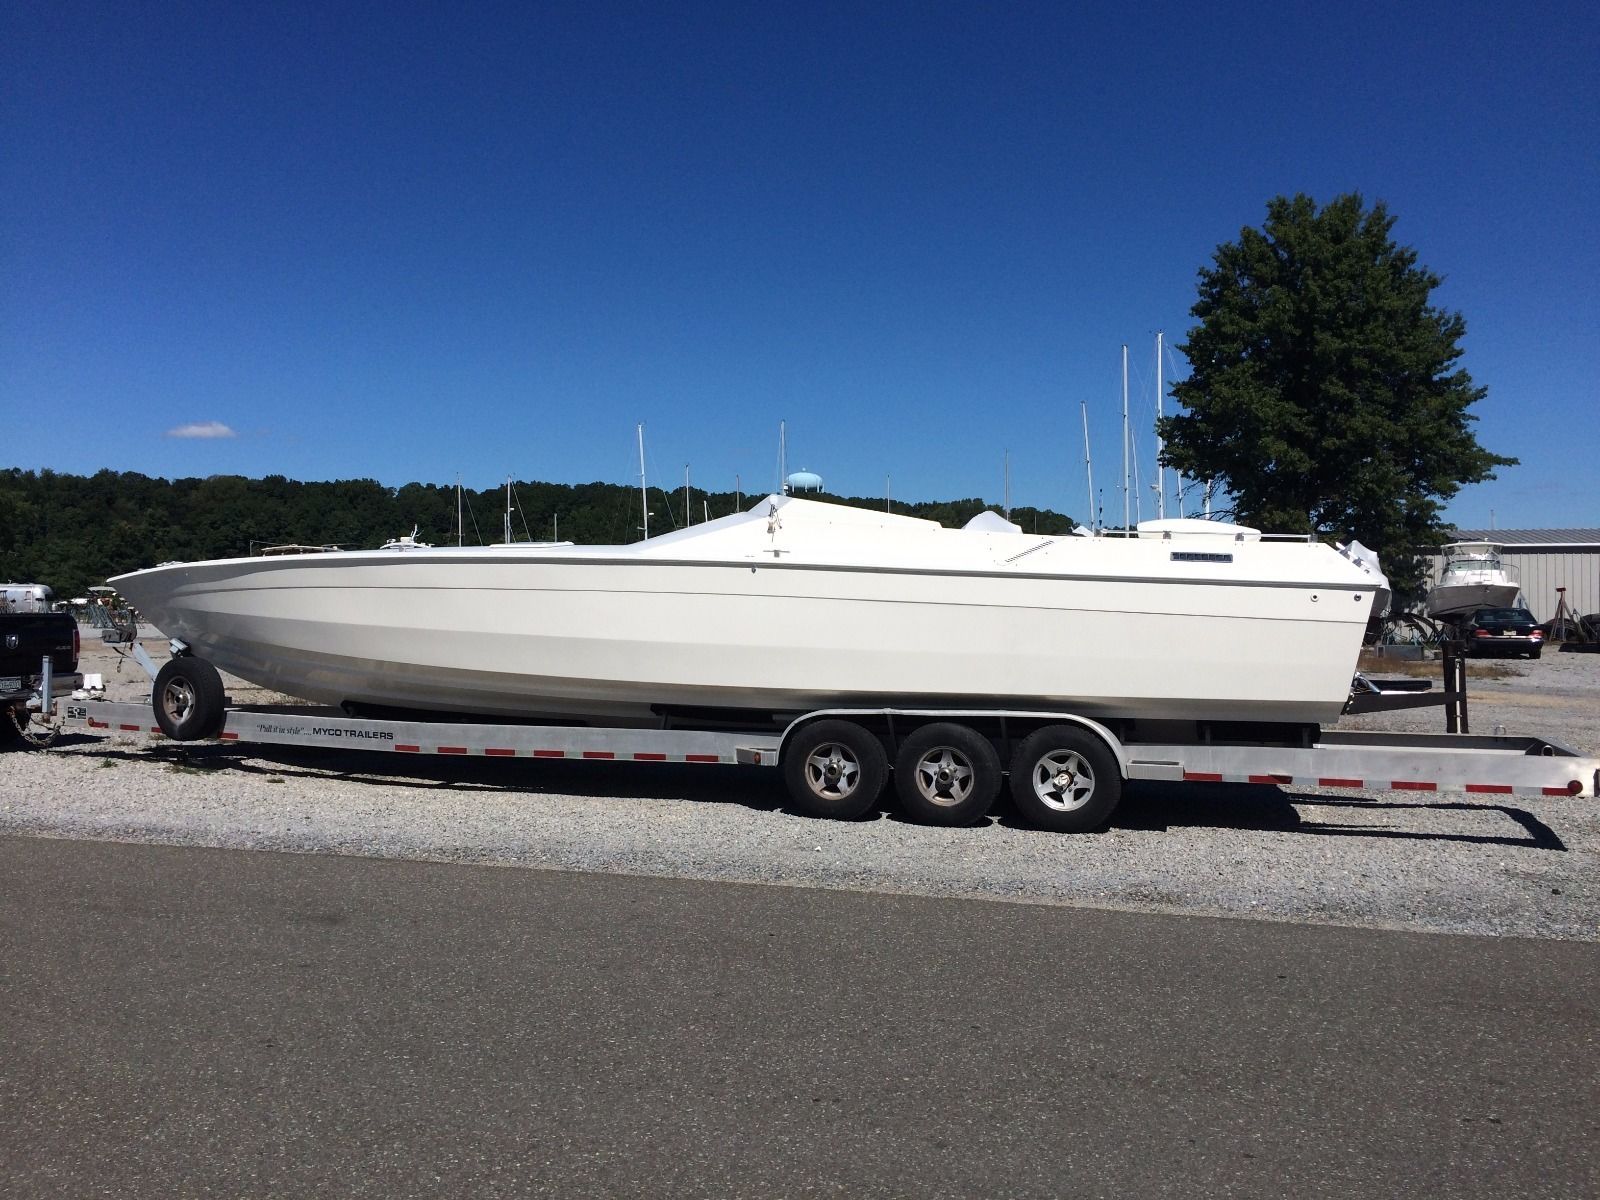 Activator 2001 for sale for $5,000 - Boats-from-USA.com